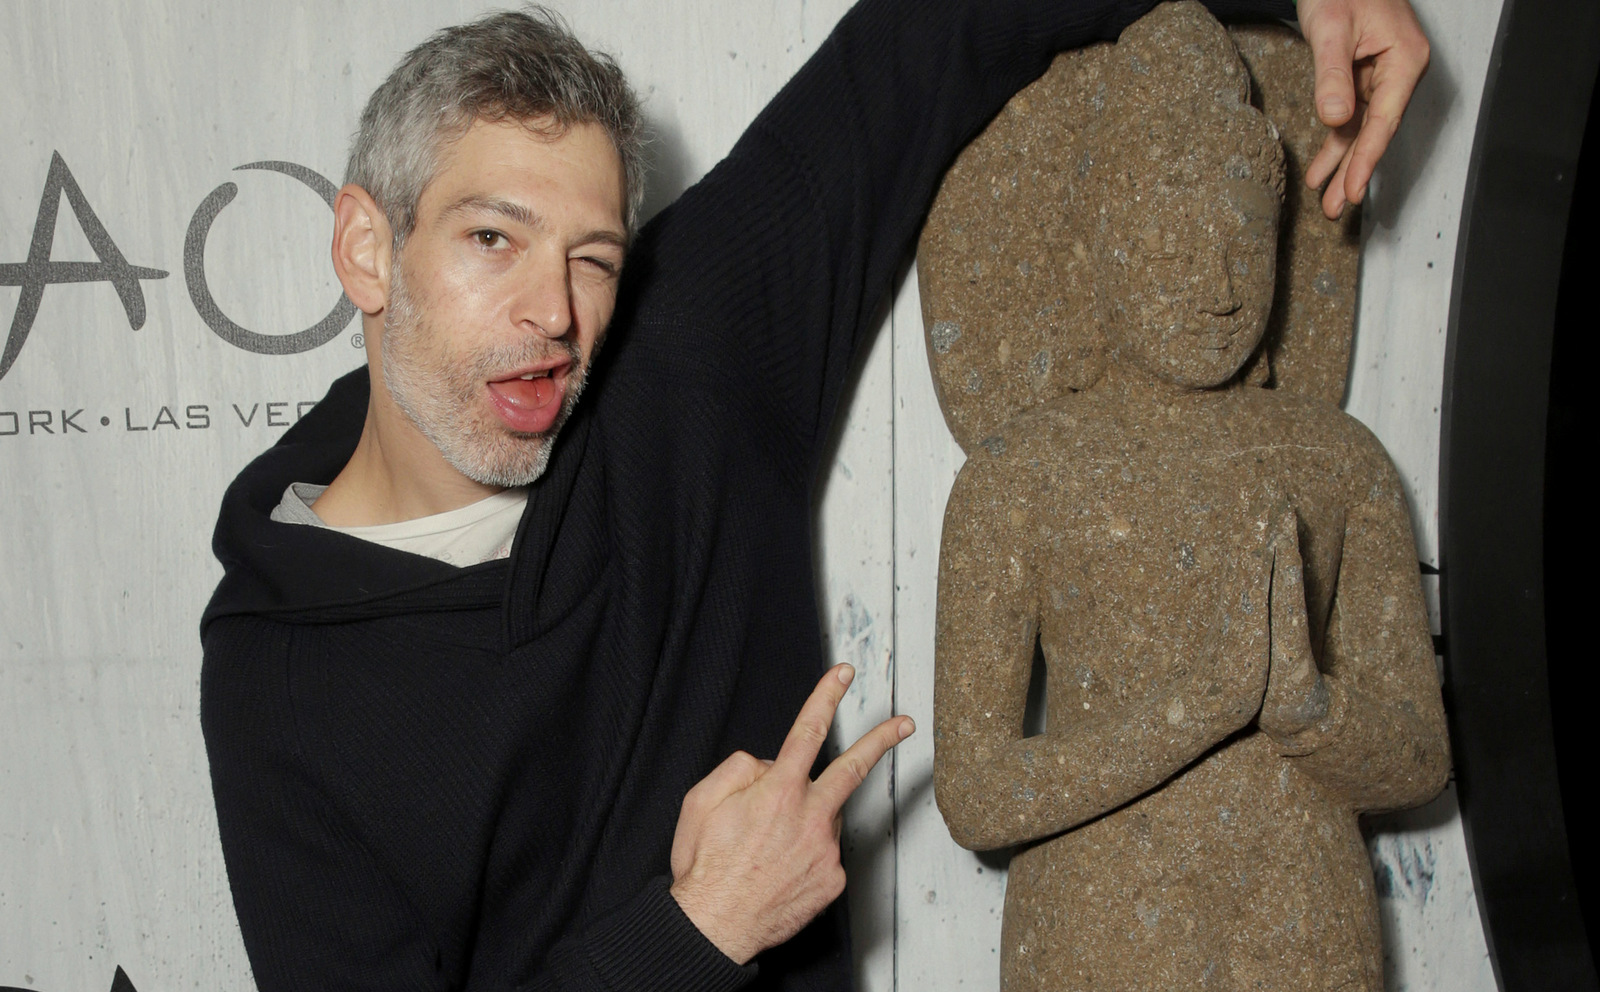 Matisyahu attends TAO Sundance on Sunday, Jan. 25, 2015, in Park City, Utah. (Photo by Todd Williamson/Invision for TAO Group/AP Images)